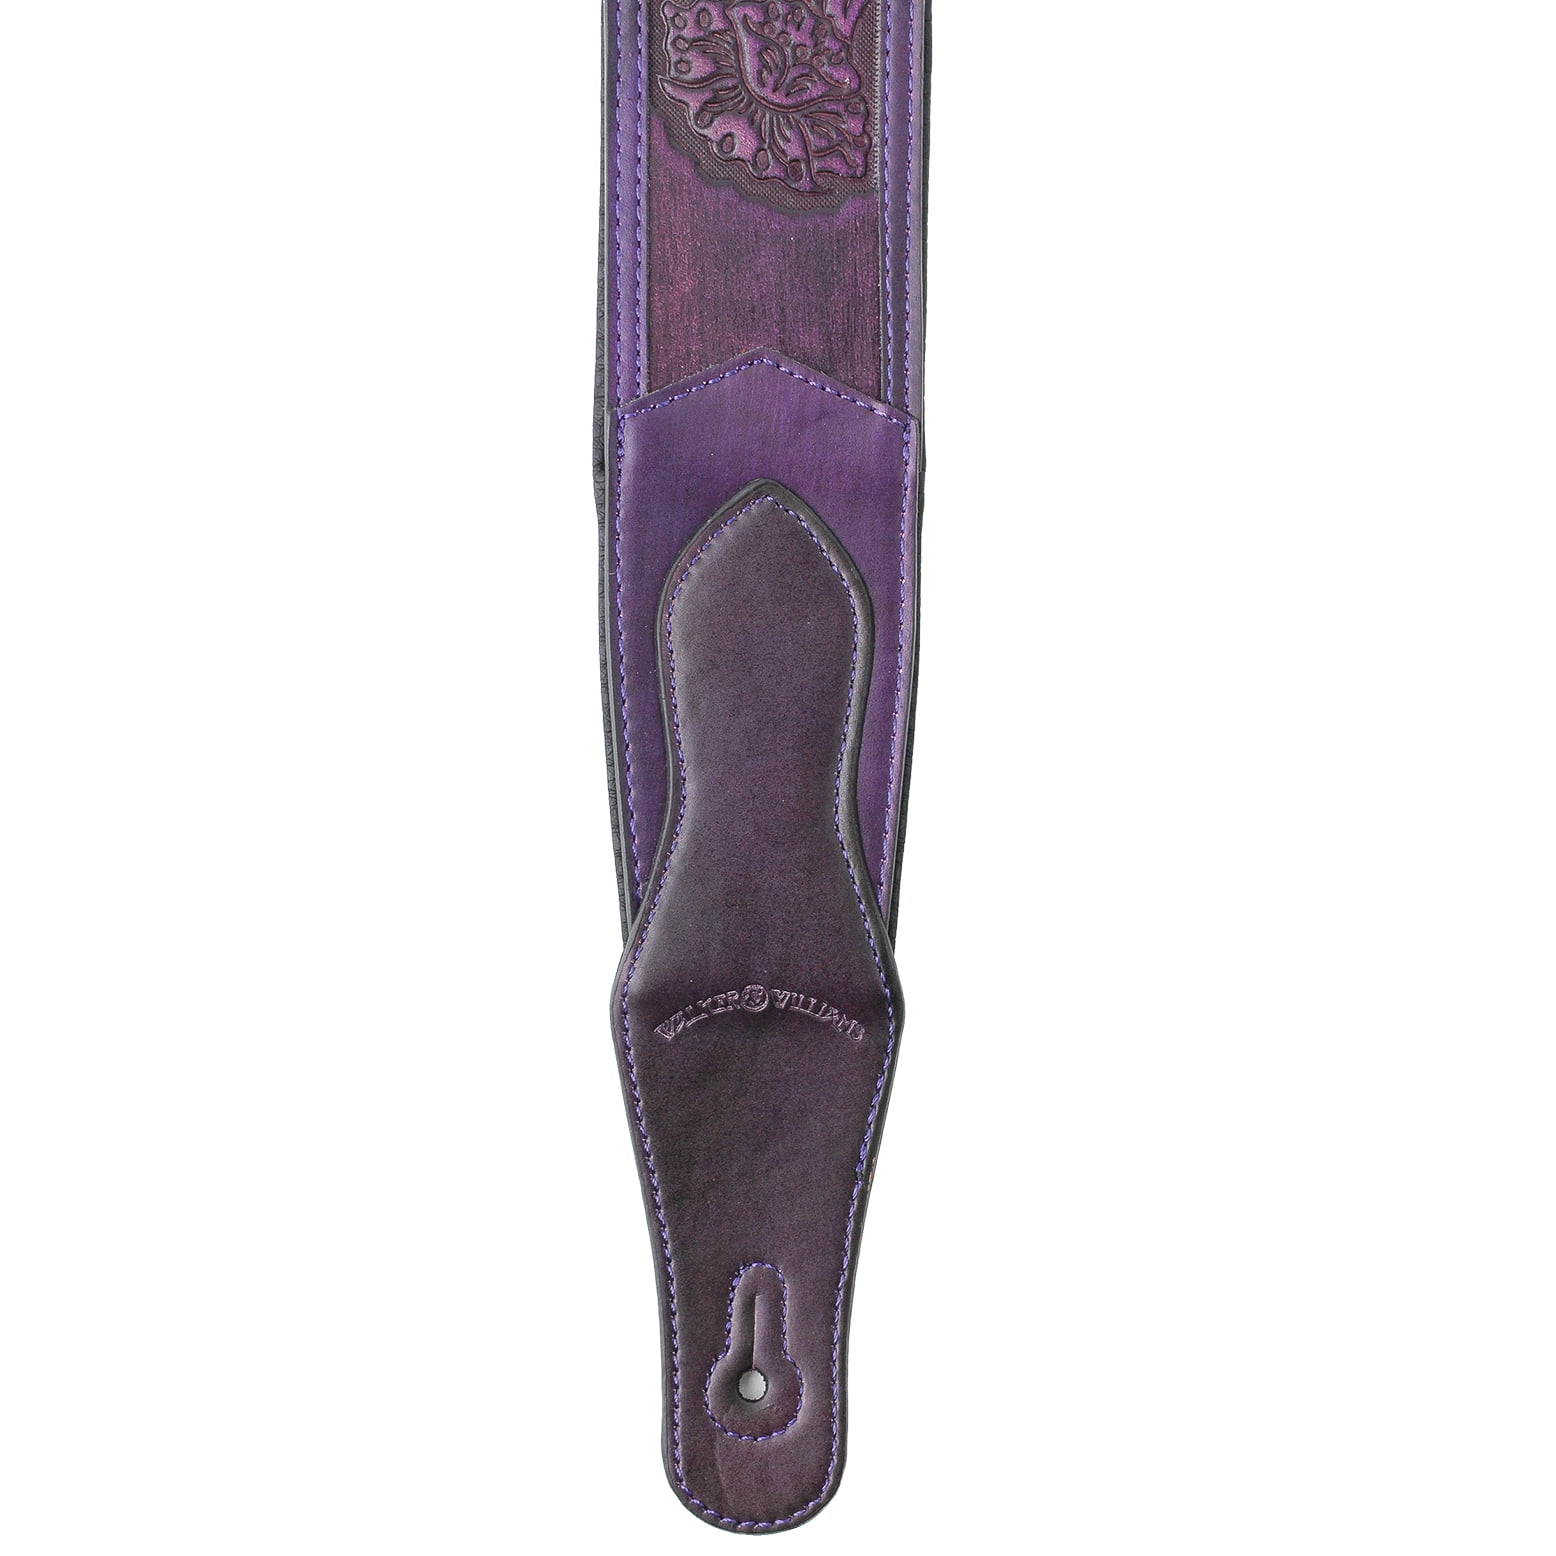 Walker & Williams LID-06 Purple Leather Padded Guitar Strap with Embossed Tooling